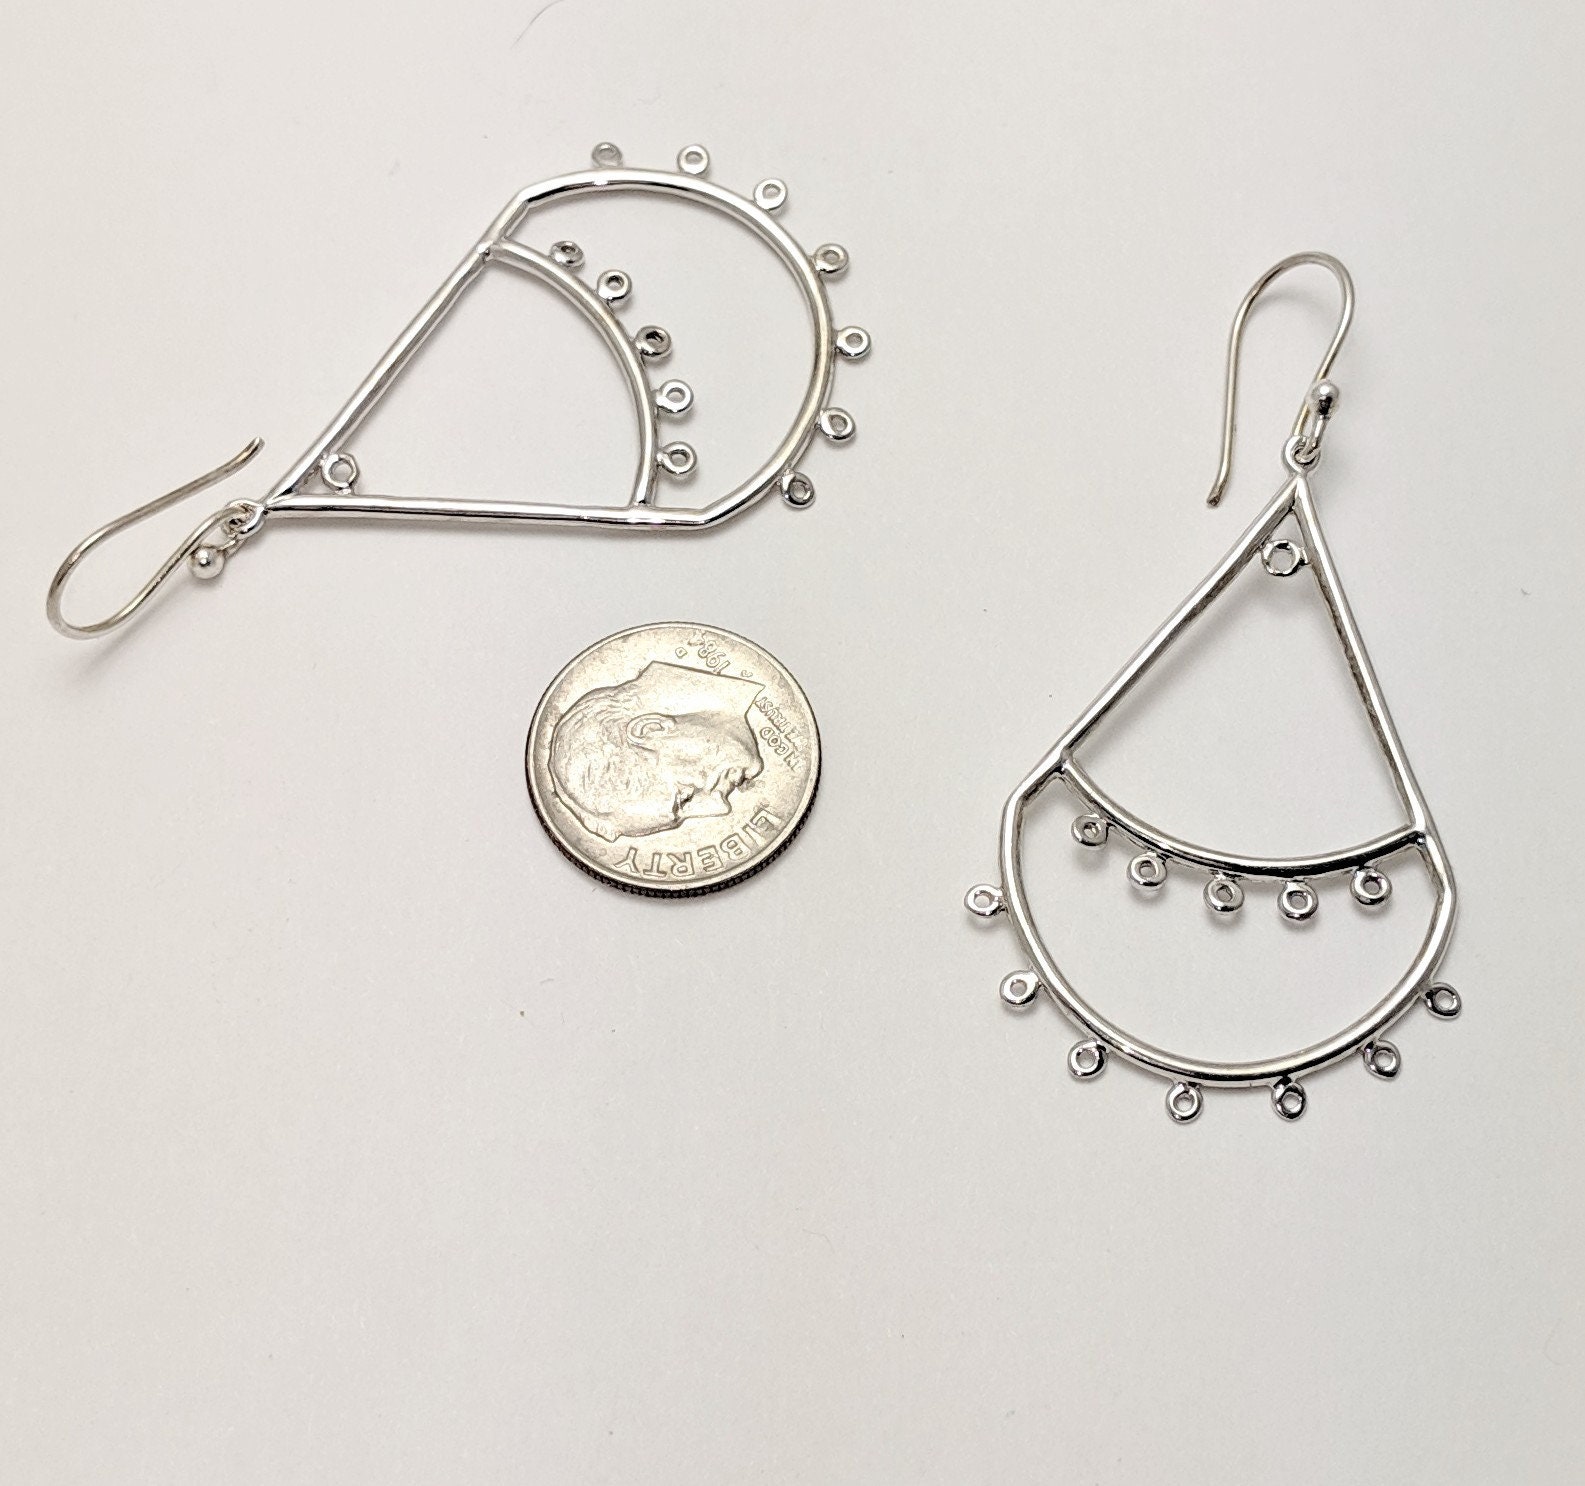 925 Sterling Silver Hook Earrings With Chandelier Drop Components, 13  Rings, Wholesale Jewelry Supplies, DIY 